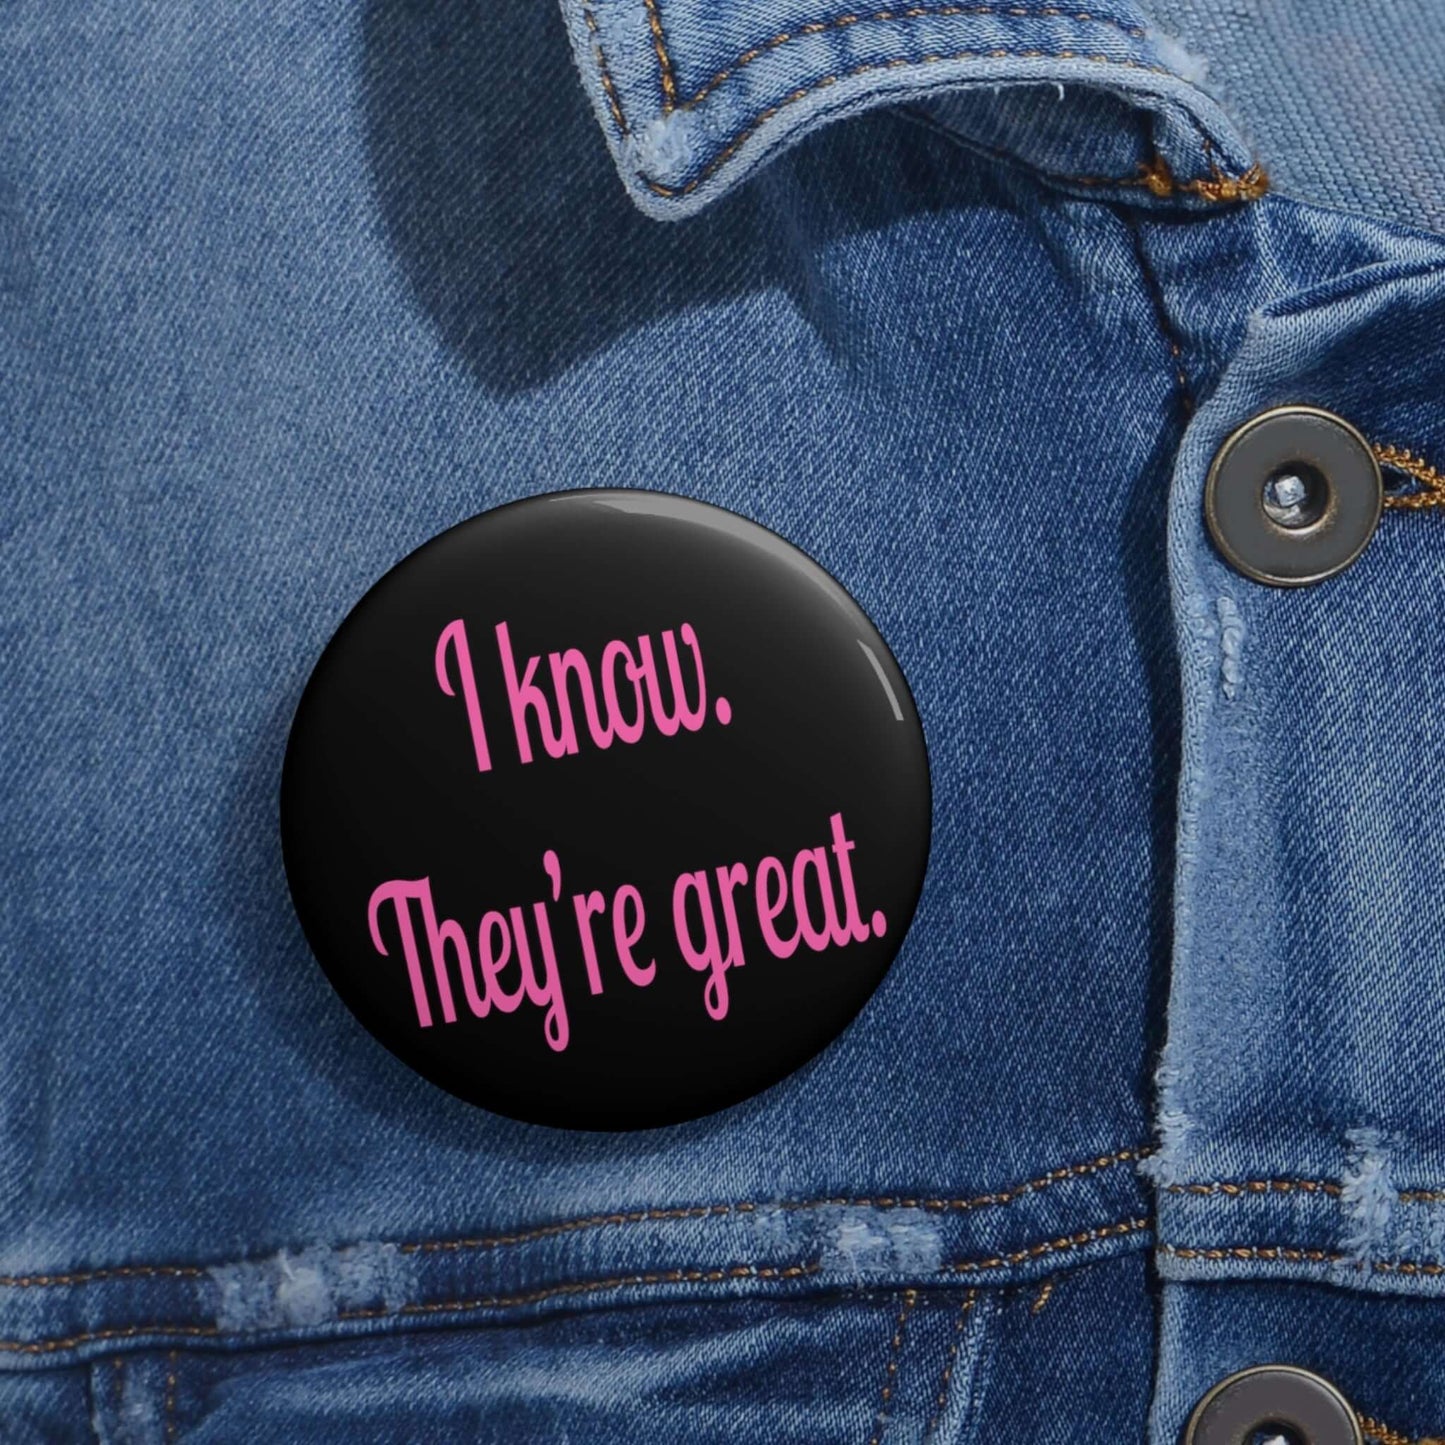 Great boobs pinback button